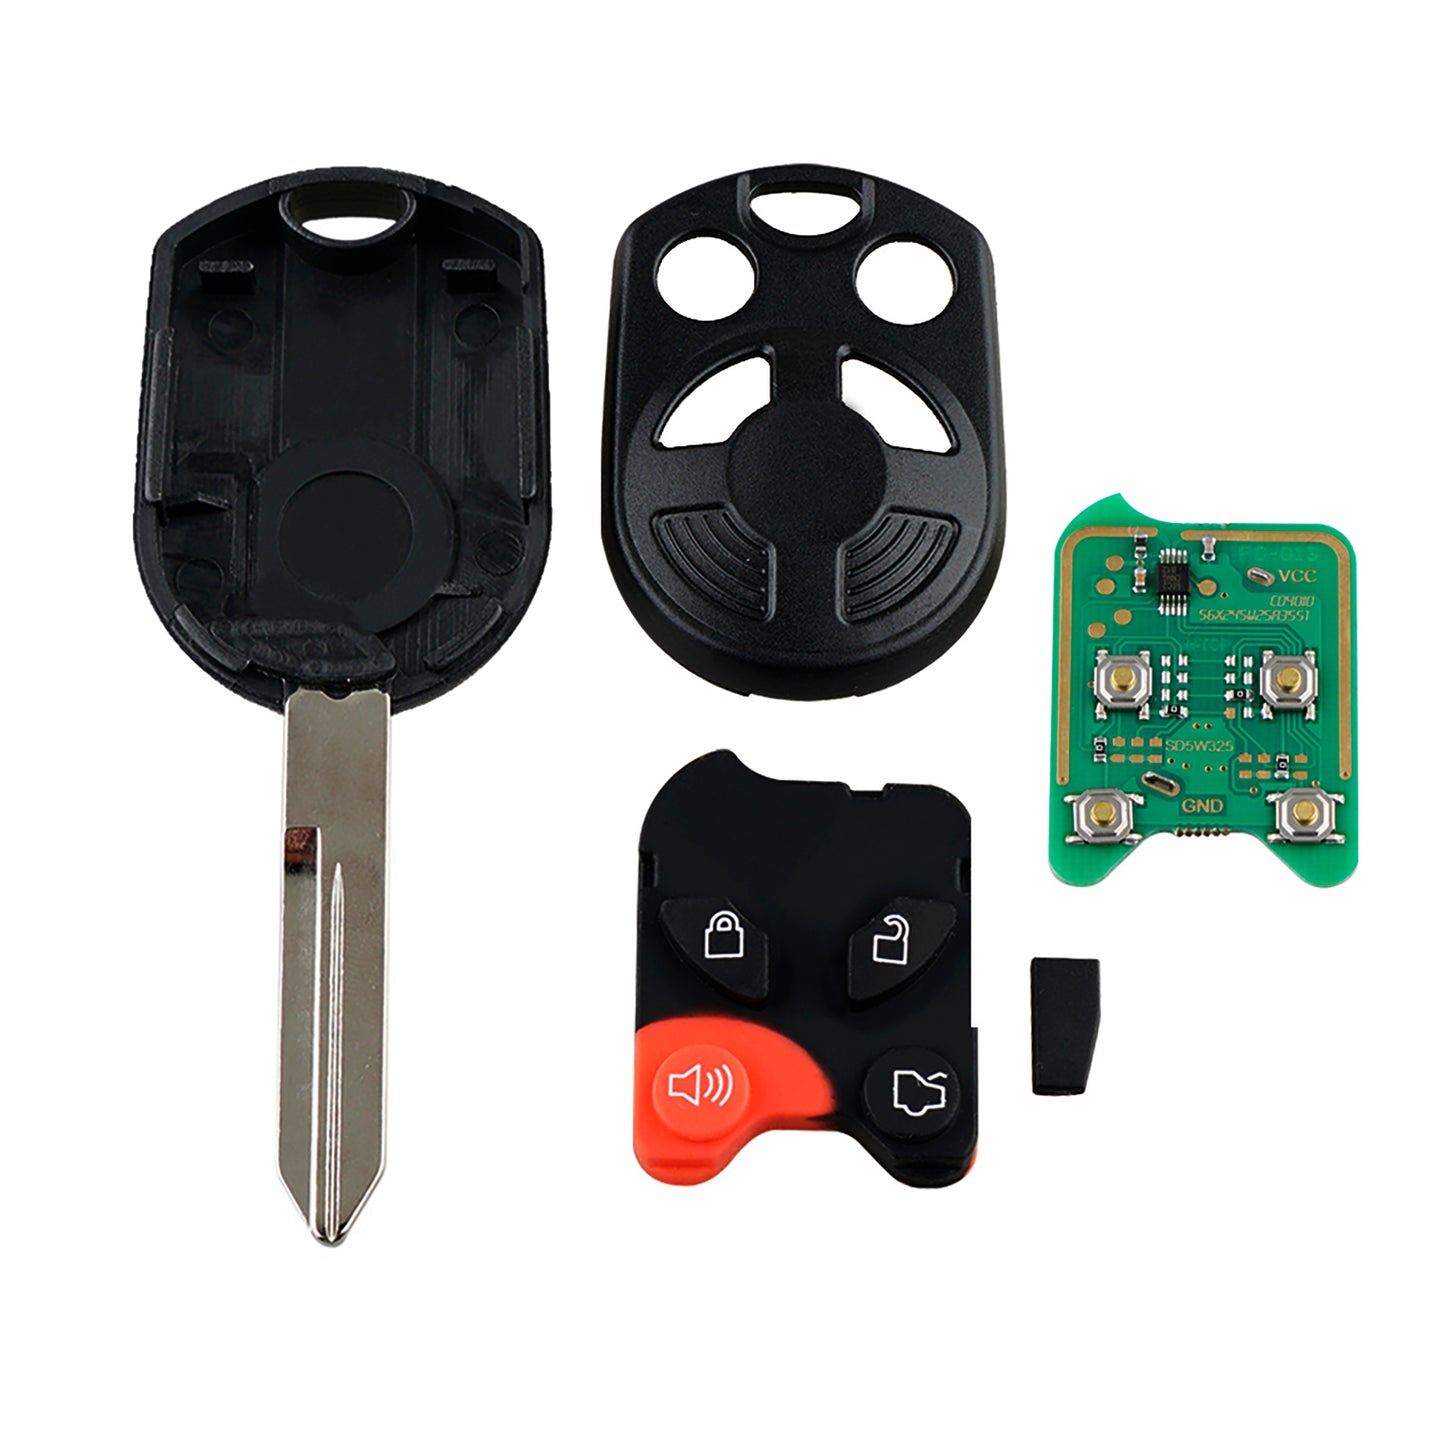 4 Buttons 315MHz Keyless Entry Fob Remote Car Key For 2007-2012Ford Edge Escape Expedition Explorer Five Hundred Flex Focus Freestyle Fusion Mustang Taurus Ford Taurus X FCC ID:  OUCD6000022 SKU : J045